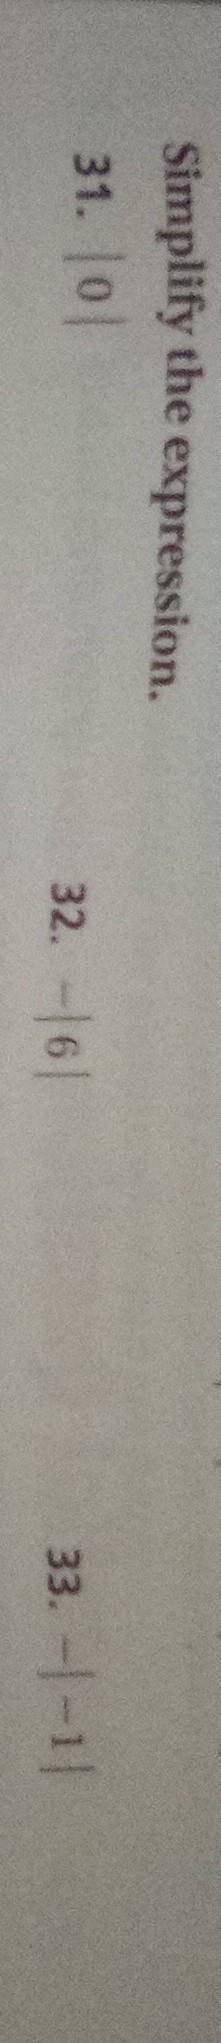 Simplify the expression. 31. l 10 l could someone explain how to do this? best answer gets brainles